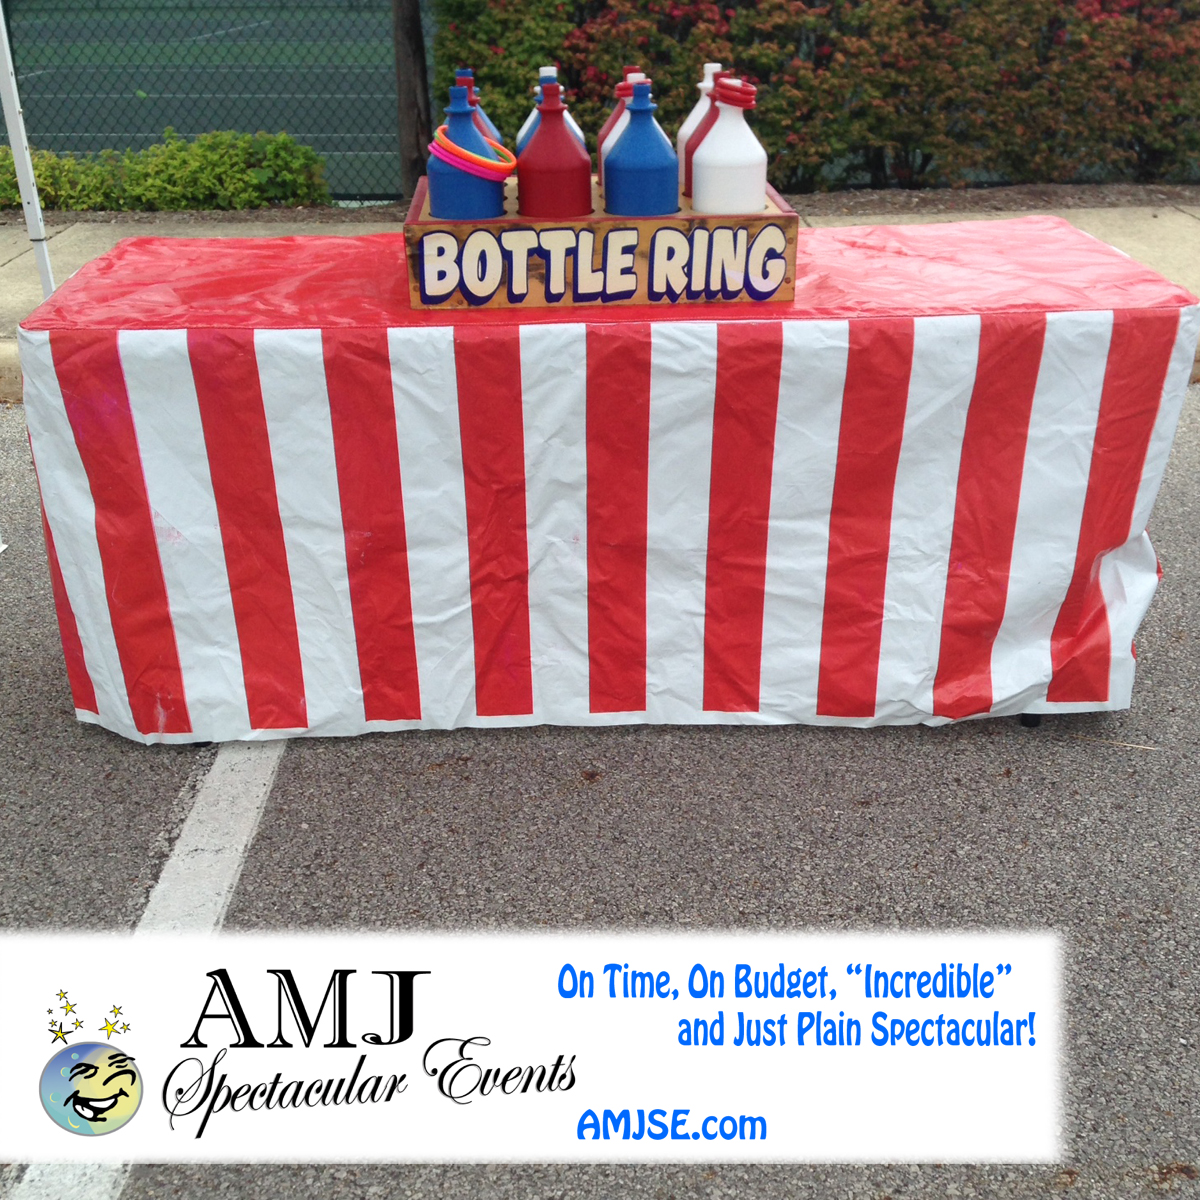 AMJ-Spectacular-Events-A-Moon-Jump-4U-Bottle-Ring-Toss-Game